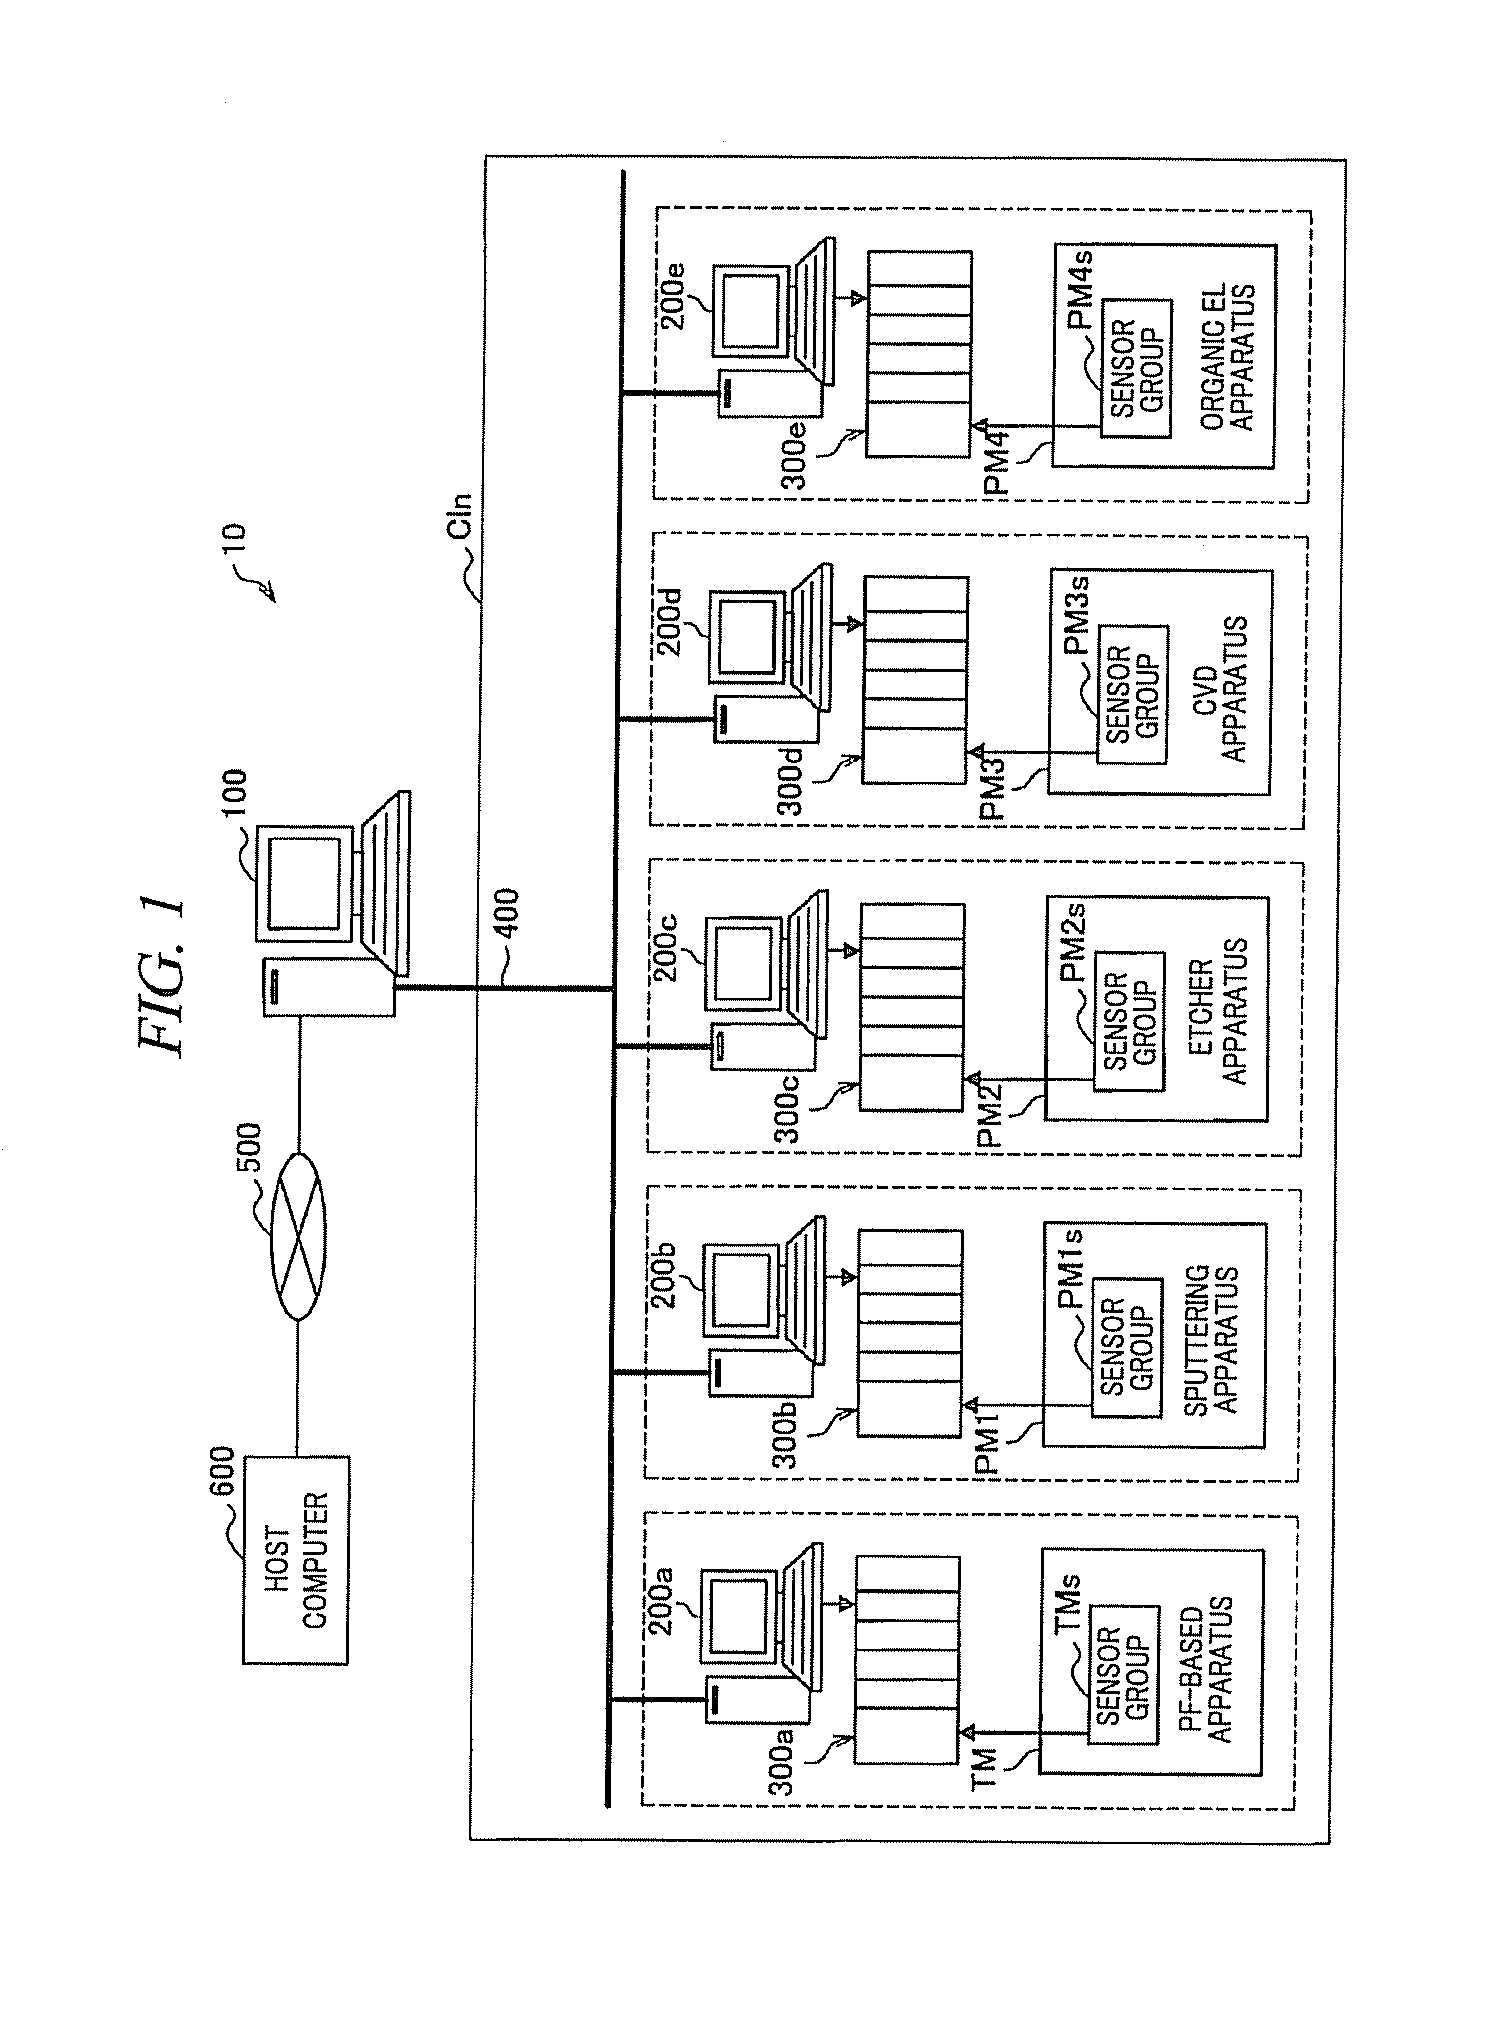 Substrate processing system, substrate processing method and storage medium storing program